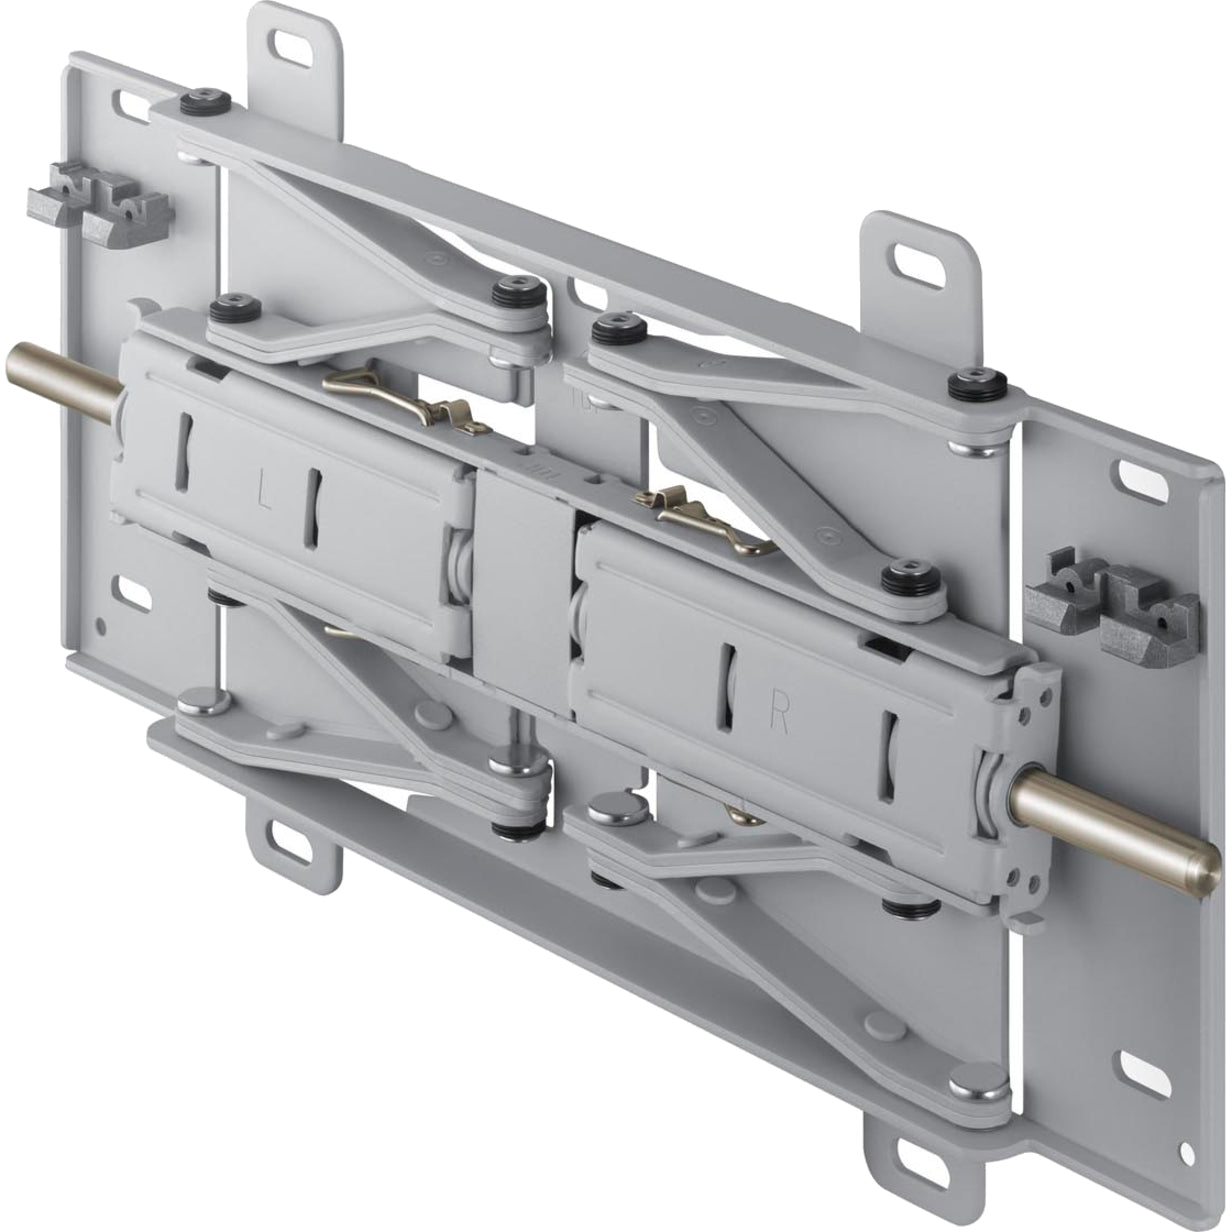 Samsung WMN-4270SD Wall Mount for Flat Panel Display, Easy Installation and Secure Mounting